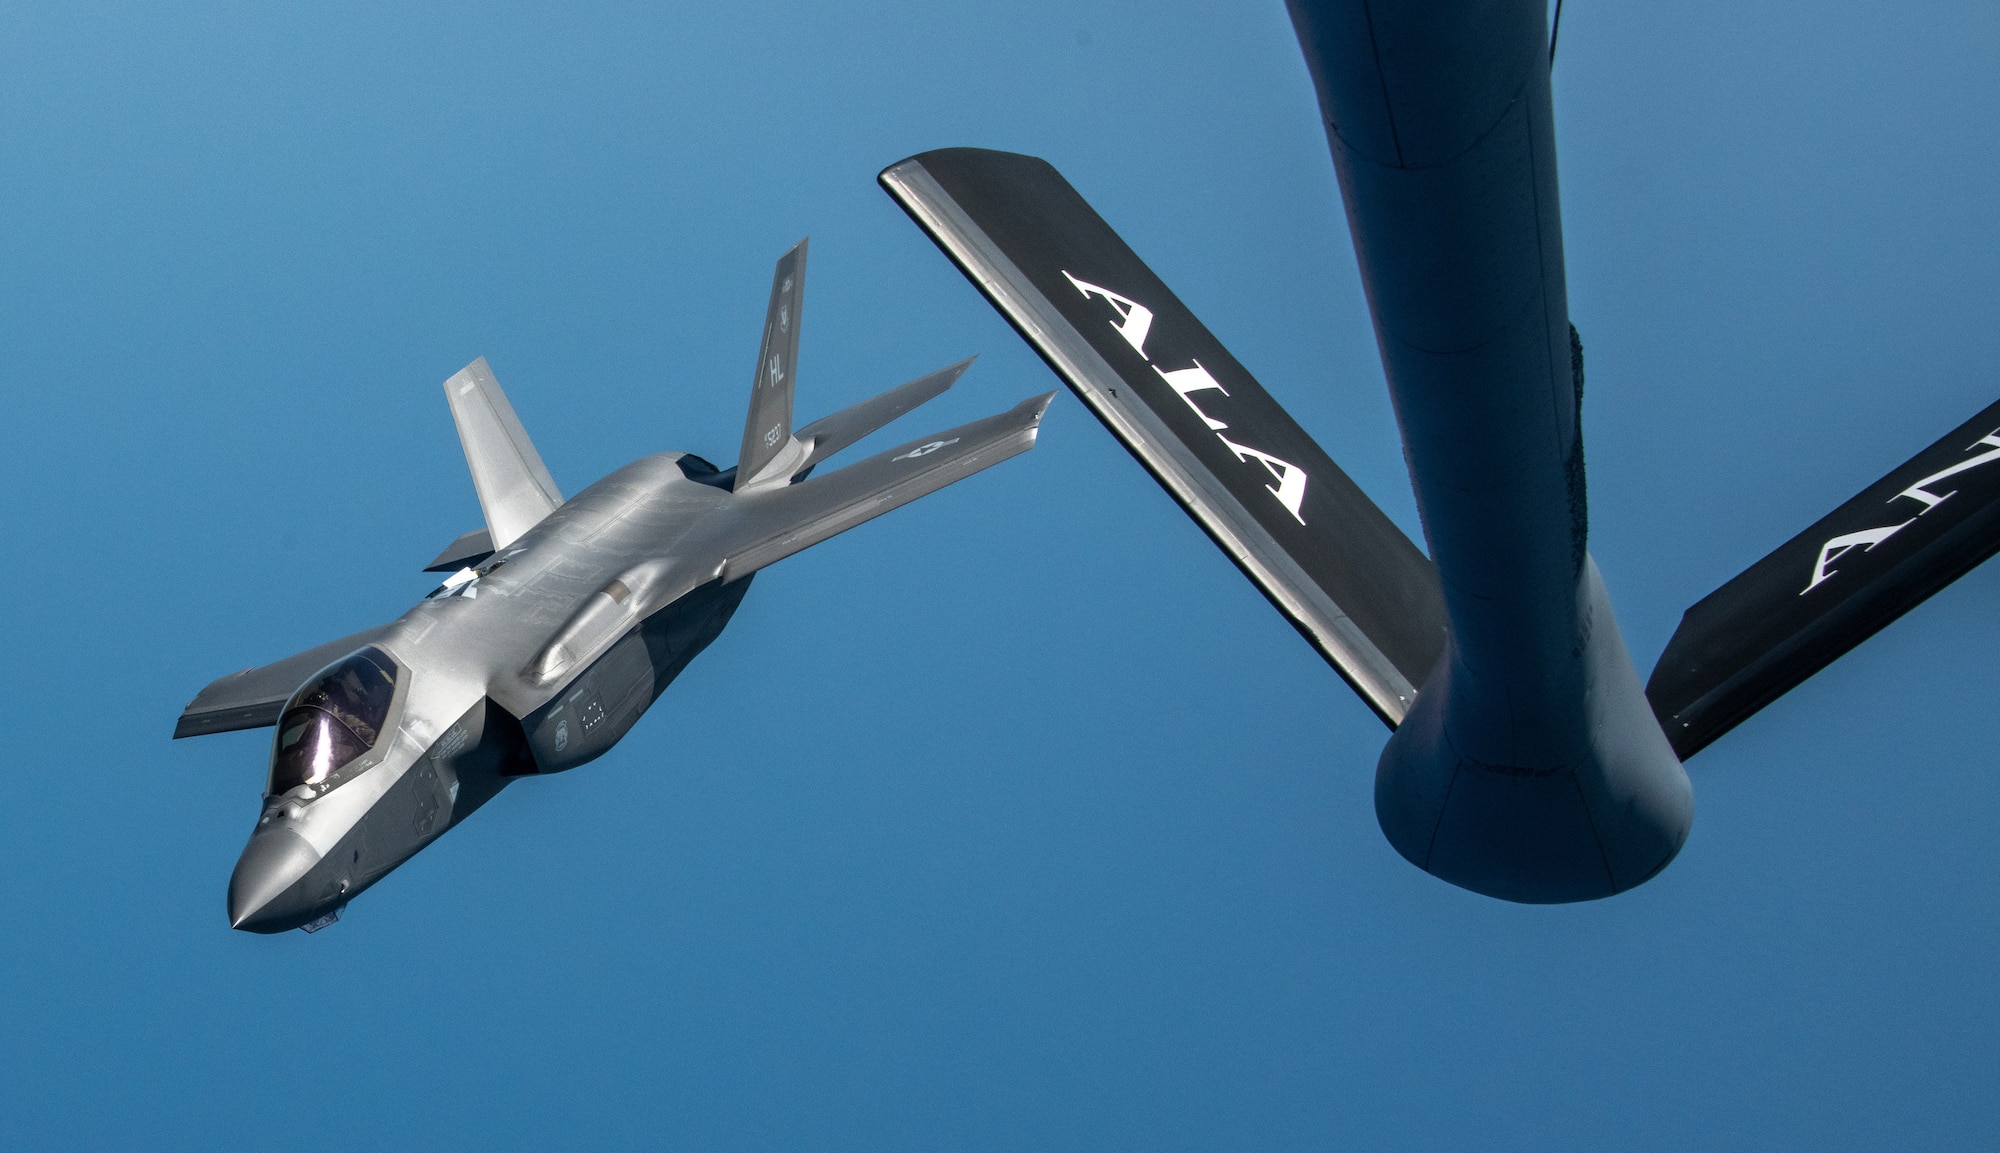 An F-35A Lightning II from the 419th Fighter Wing at Hill Air Force Base, Utah receives fuel from a KC-135 Stratotanker assigned to the 117th Air Refueling Wing, Alabama Air National Guard, over the Georgia coast